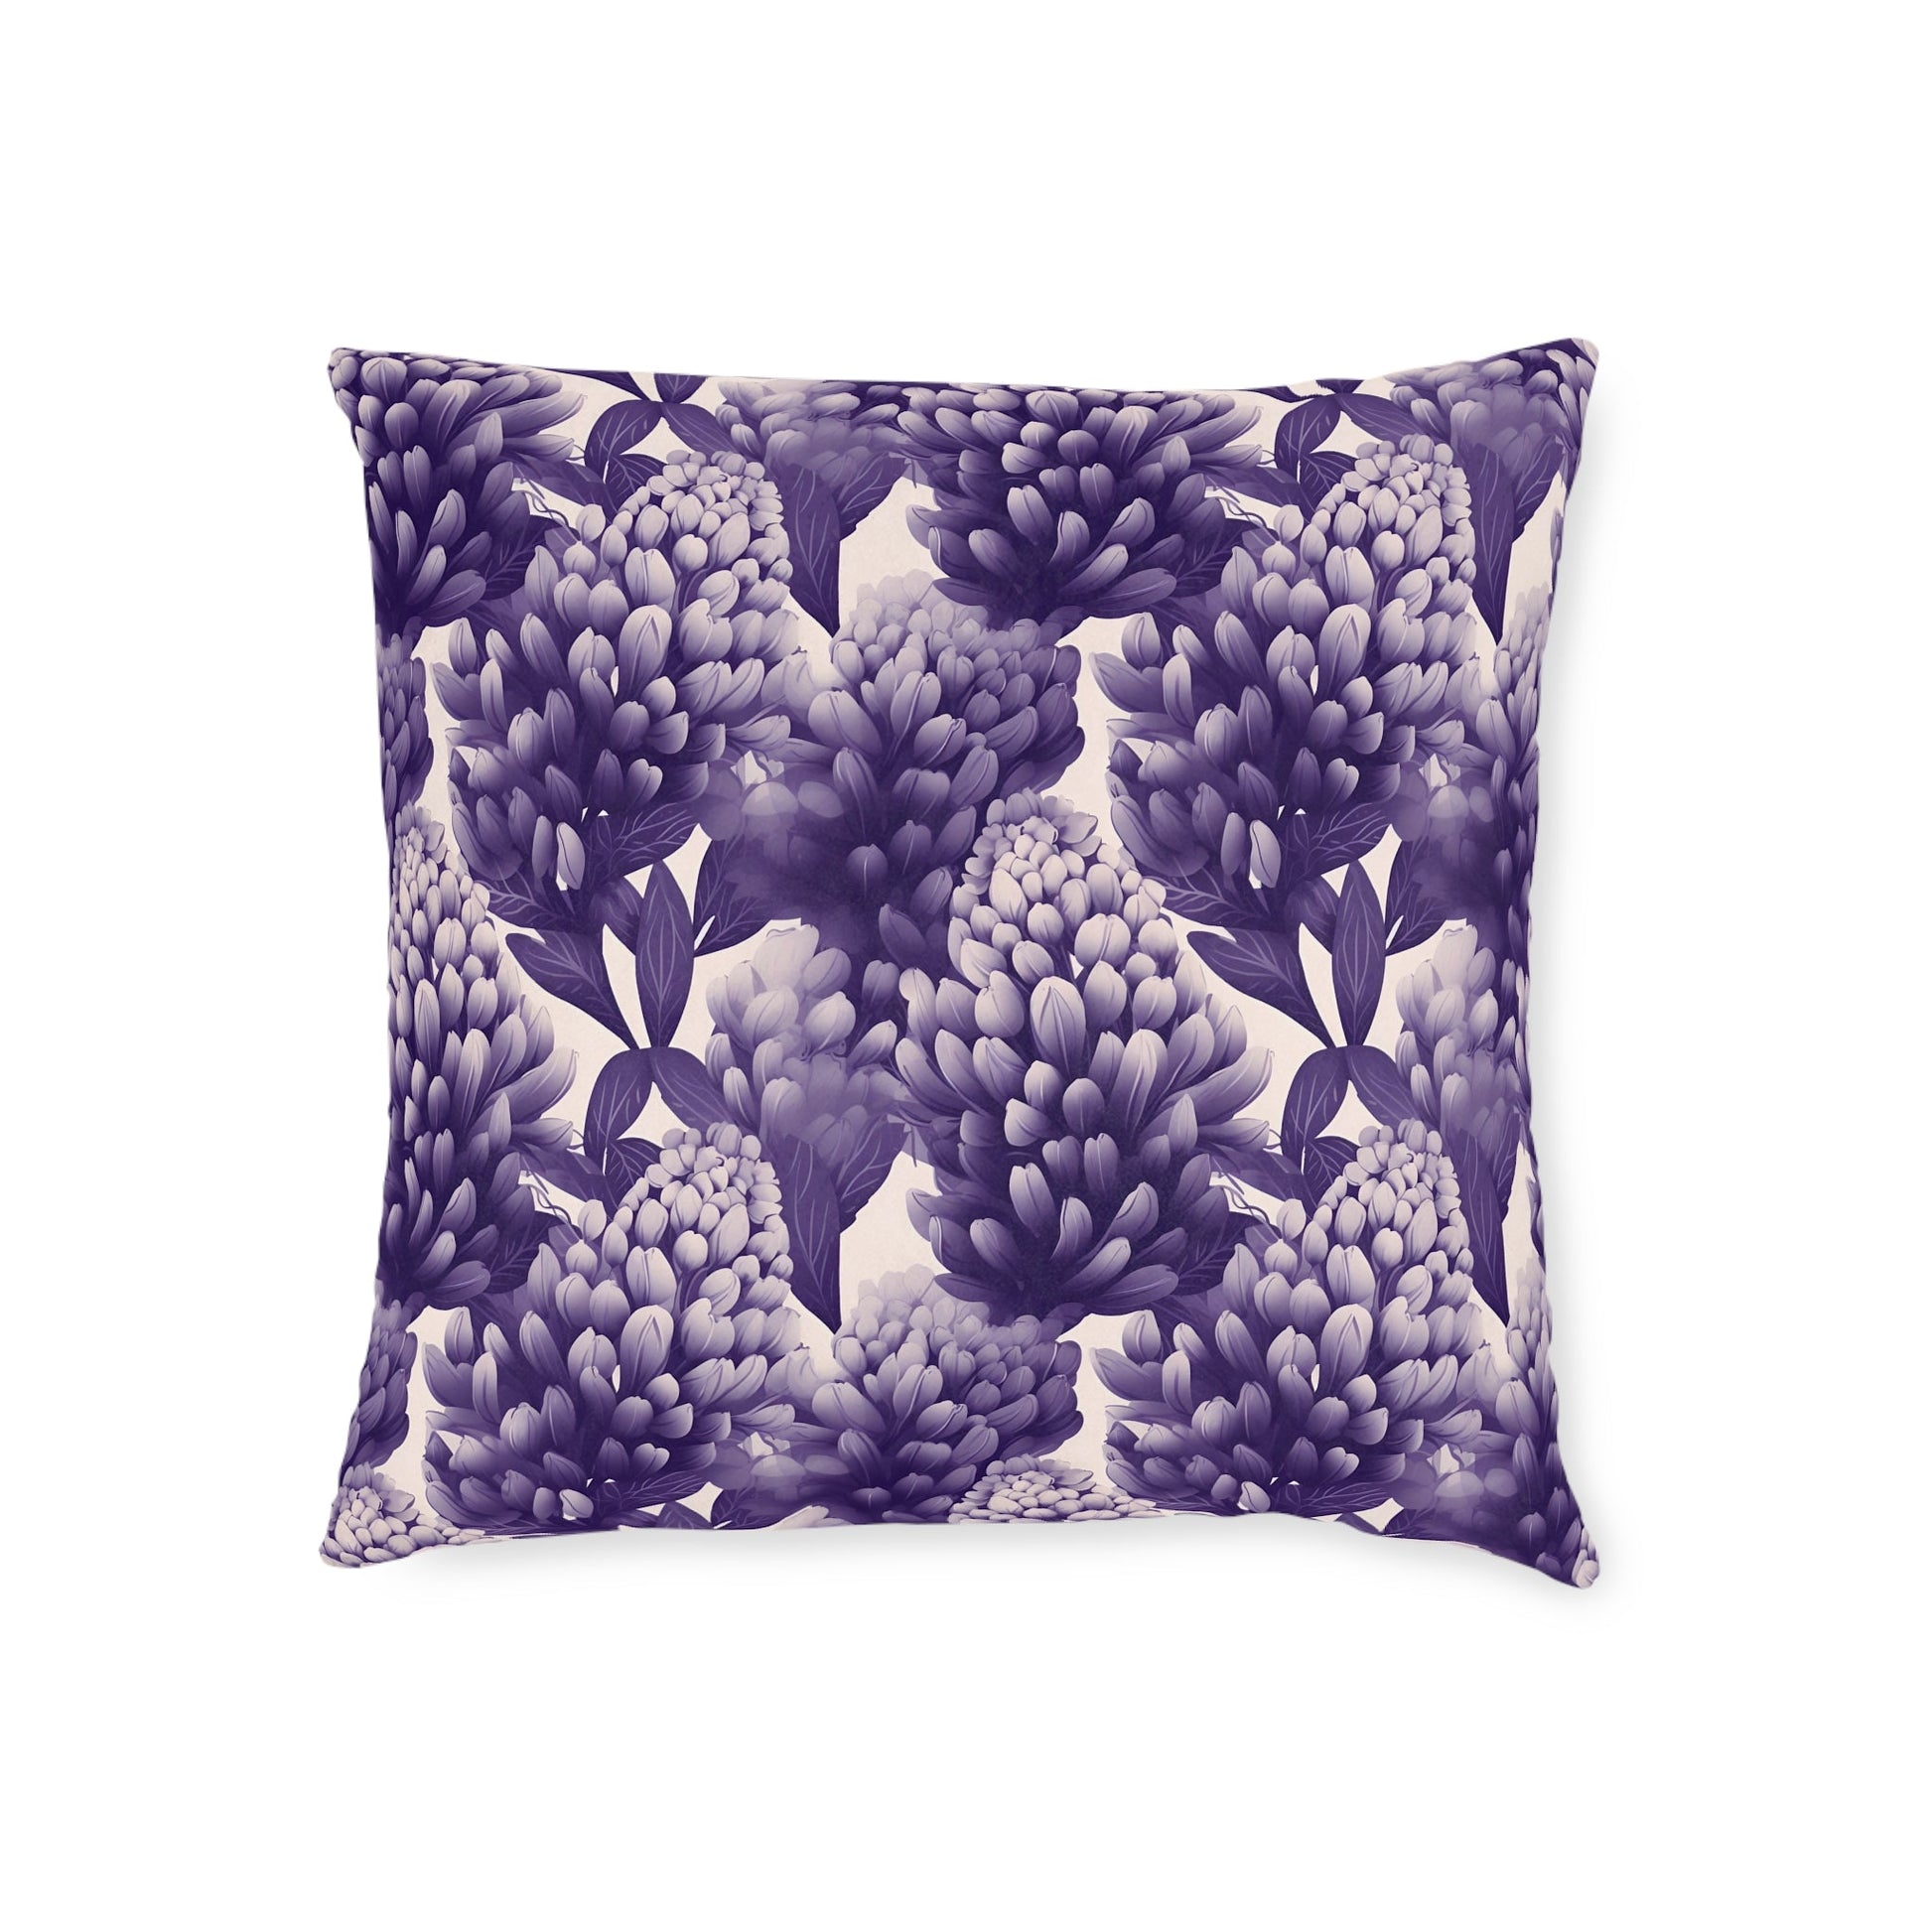 Gradient Grape Hyacinth - Purple and White Floral Sofa and Chair Cushion - Pattern Symphony